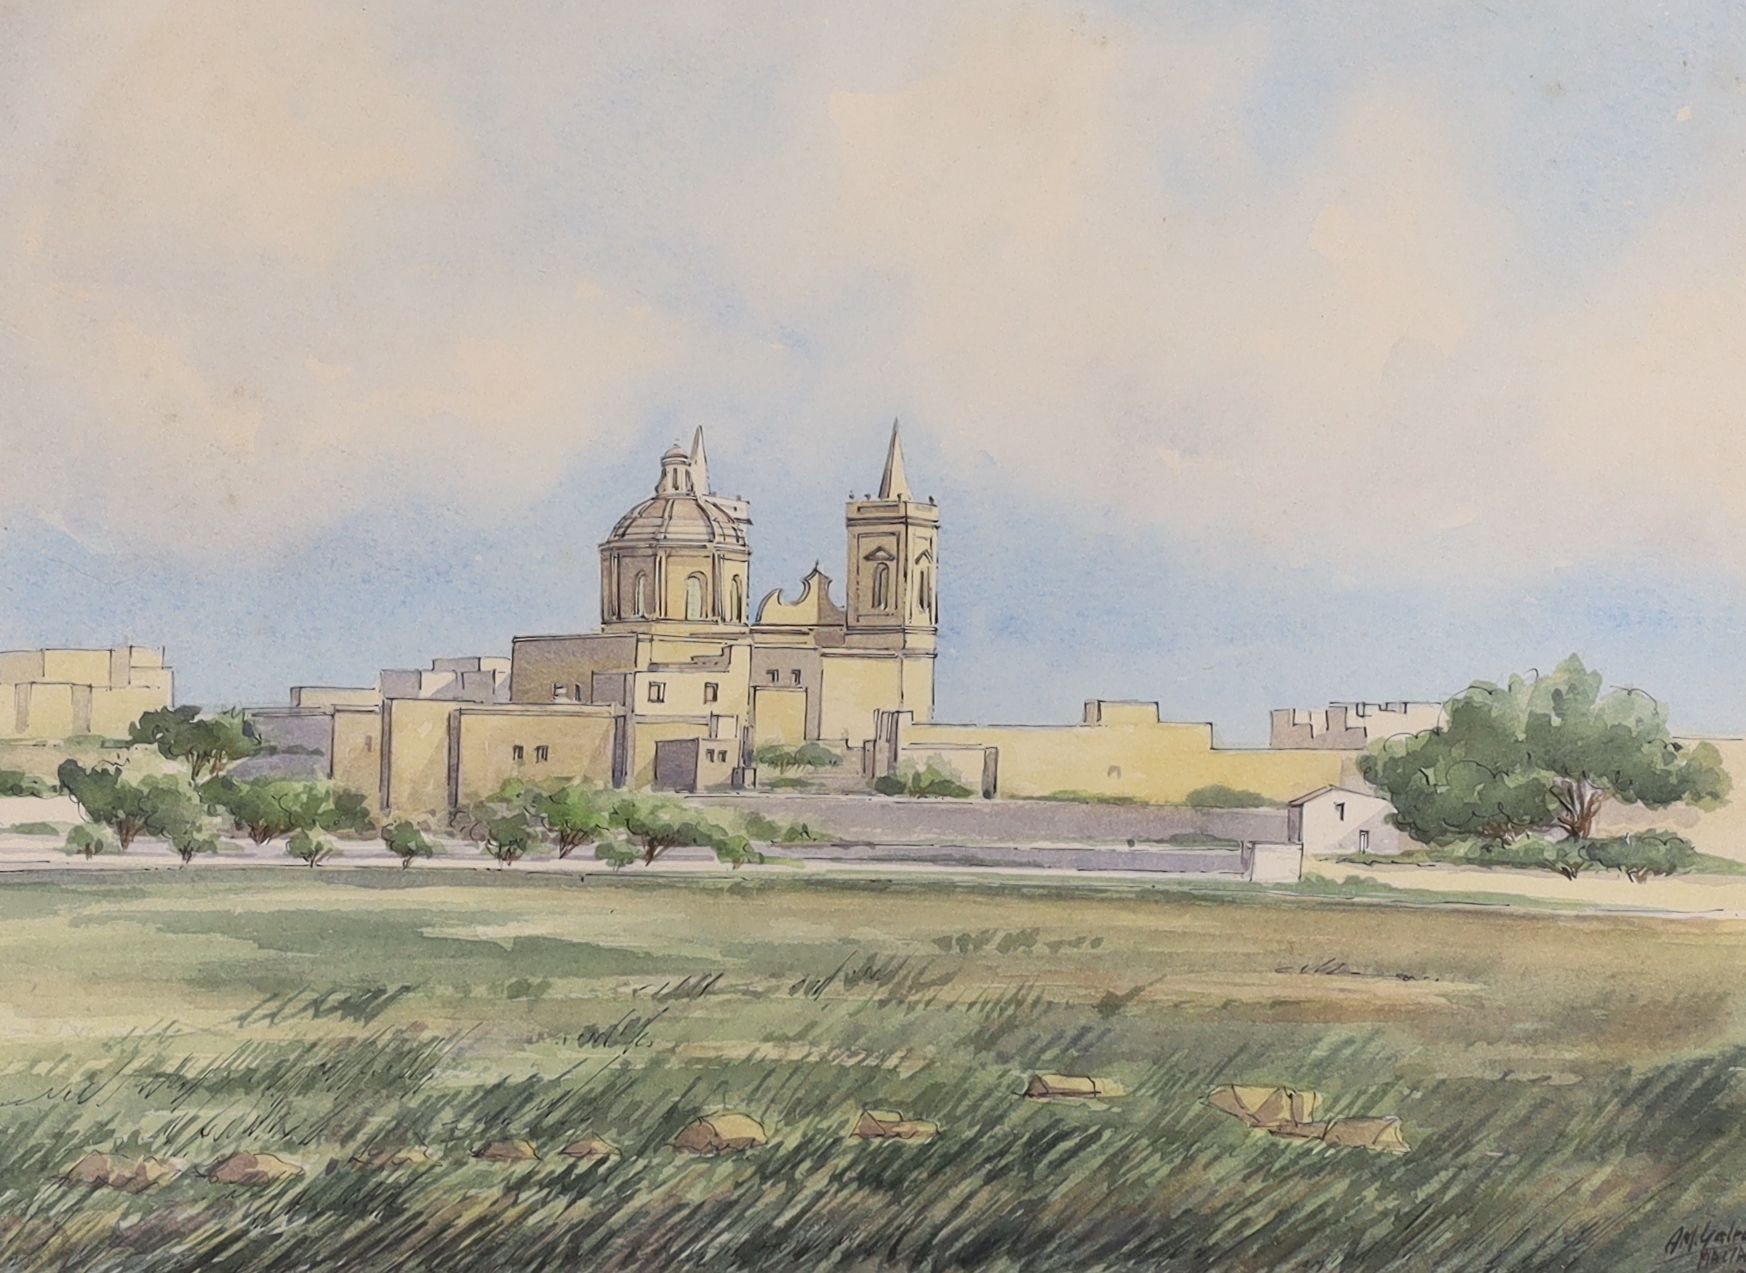 A.M. Galea, ink and watercolour, View of a Maltese town, signed and dated 1977, 27 x 37cm